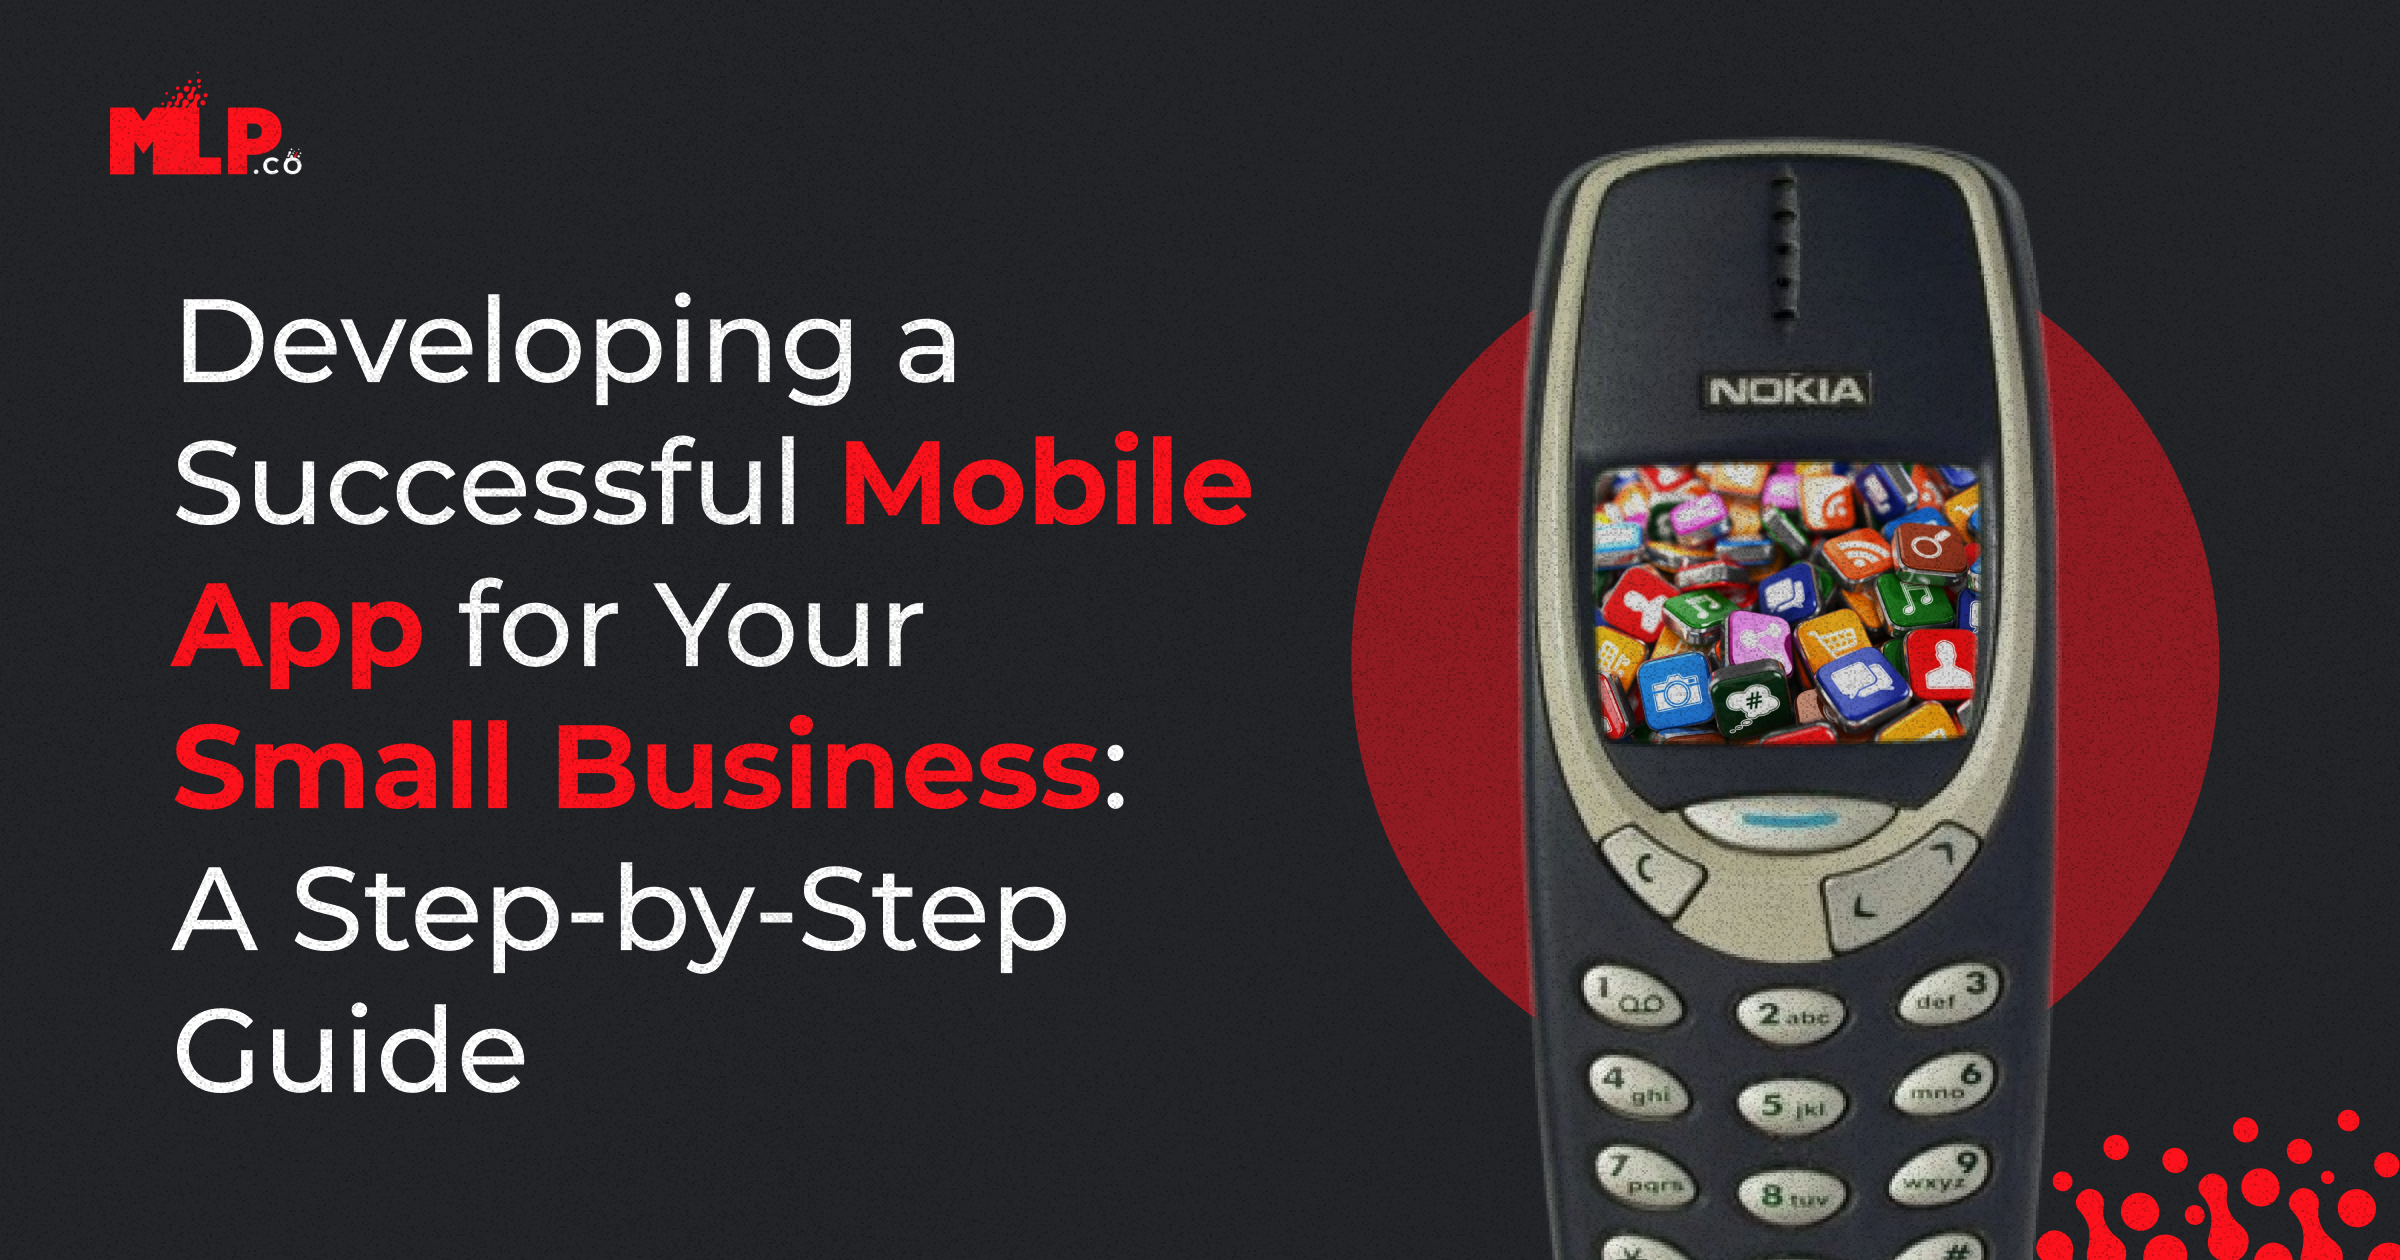 Developing a Successful Mobile App for Your Small Business: A Step-by-Step Guide